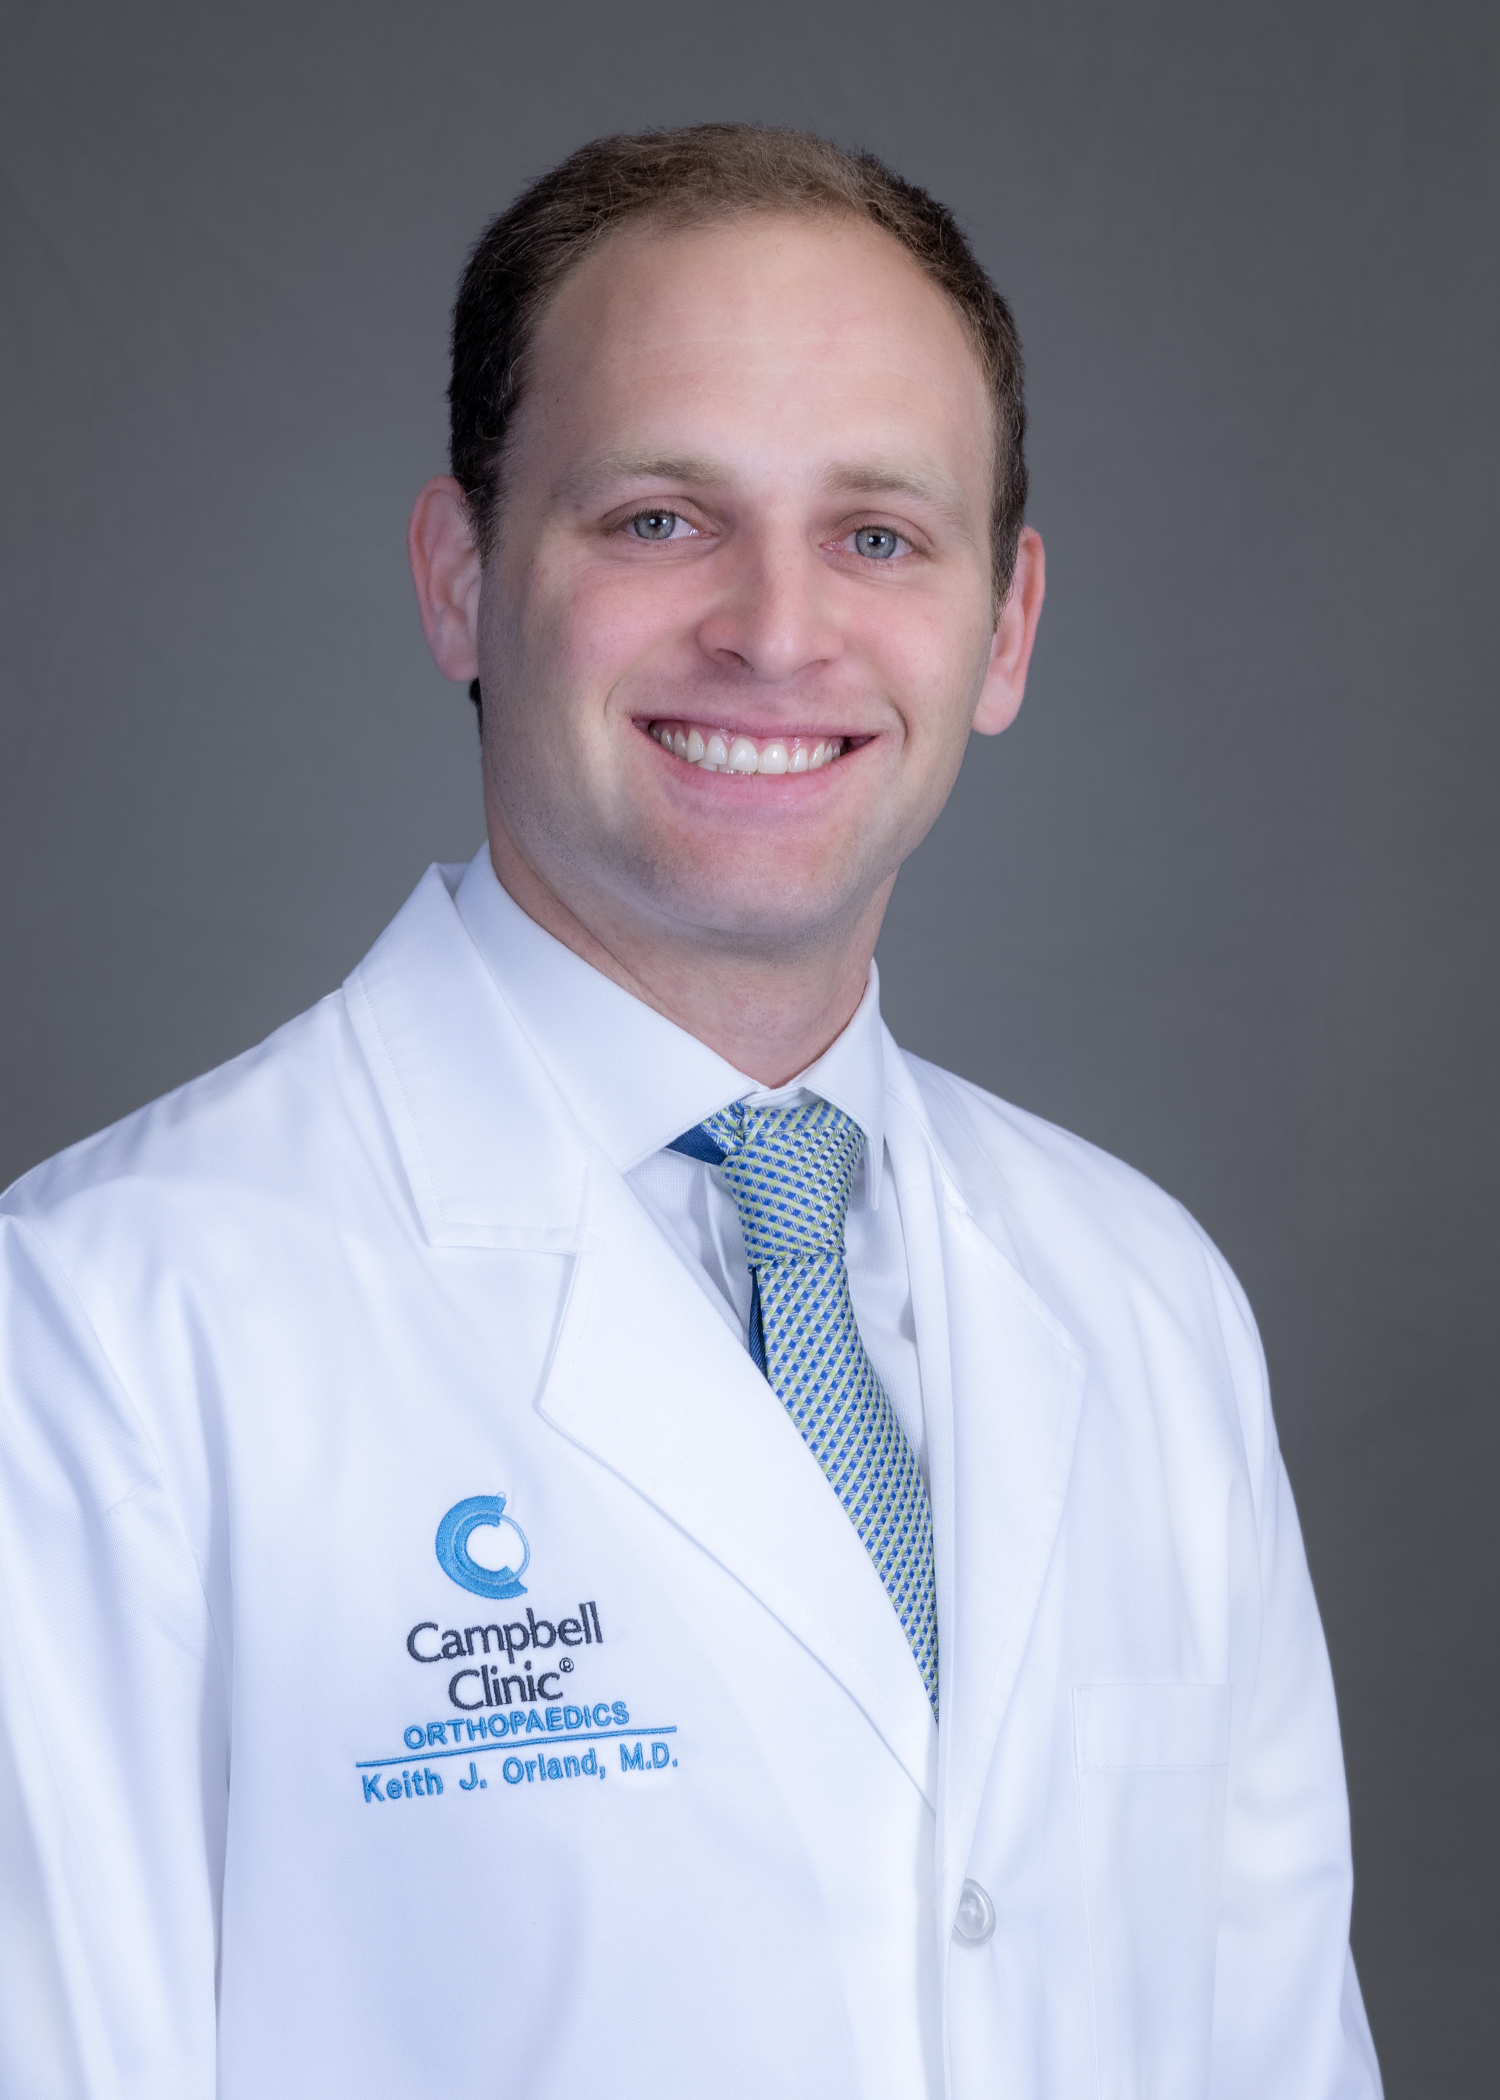 Dr. Keith J. Orland, M.D.